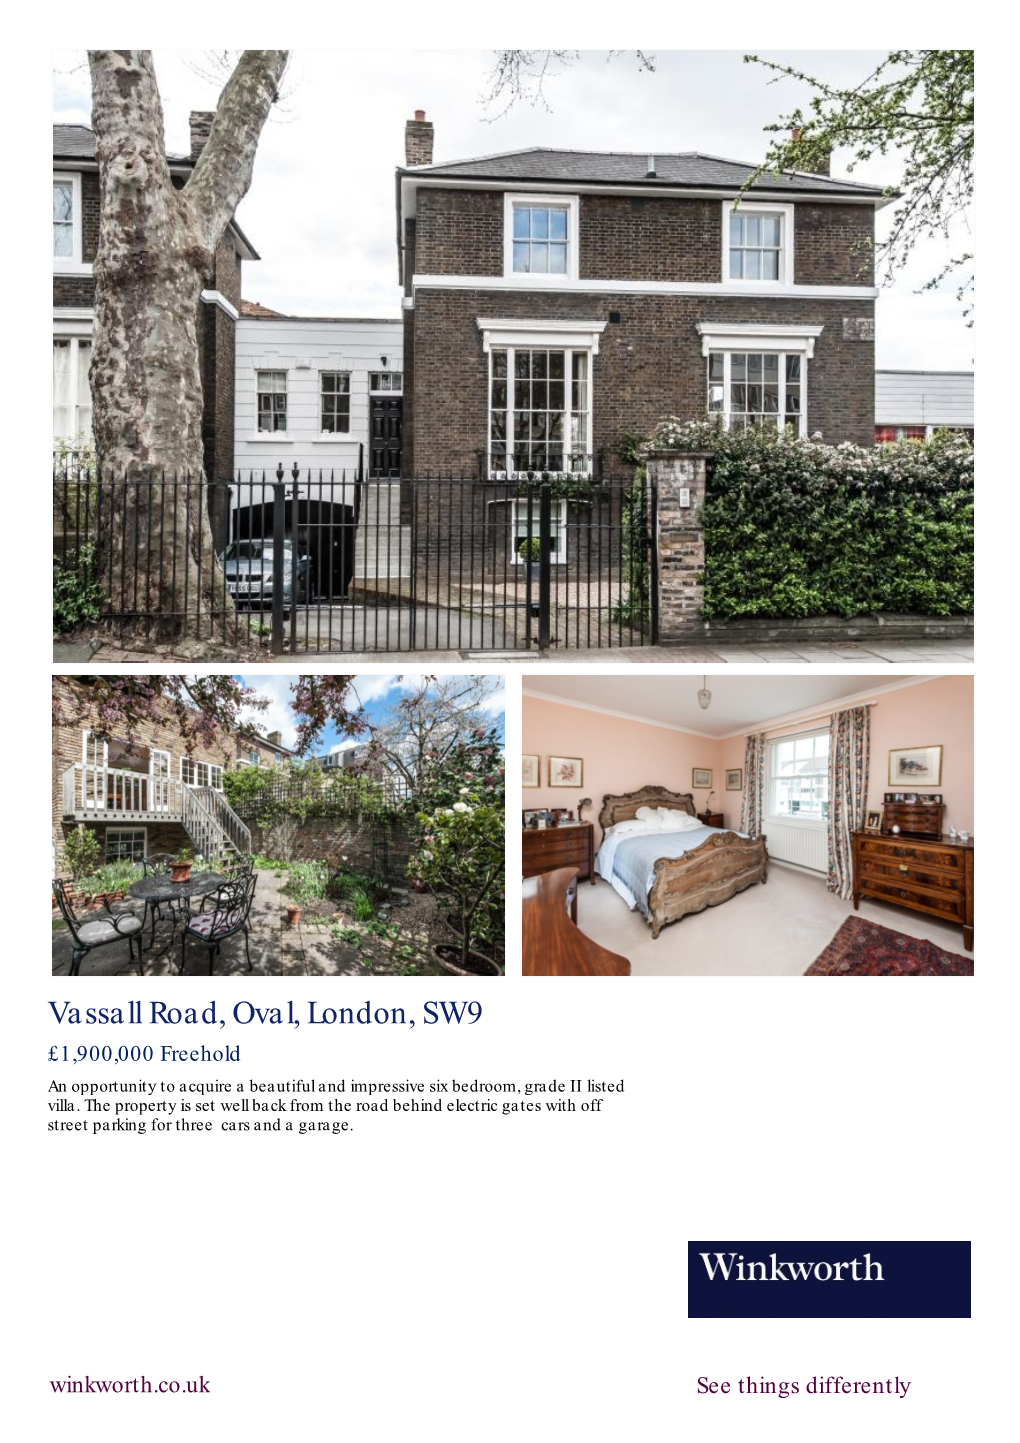 Vassall Road, Oval, London, SW9 £1,900,000 Freehold an Opportunity to Acquire a Beautiful and Impressive Six Bedroom, Grade II Listed Villa